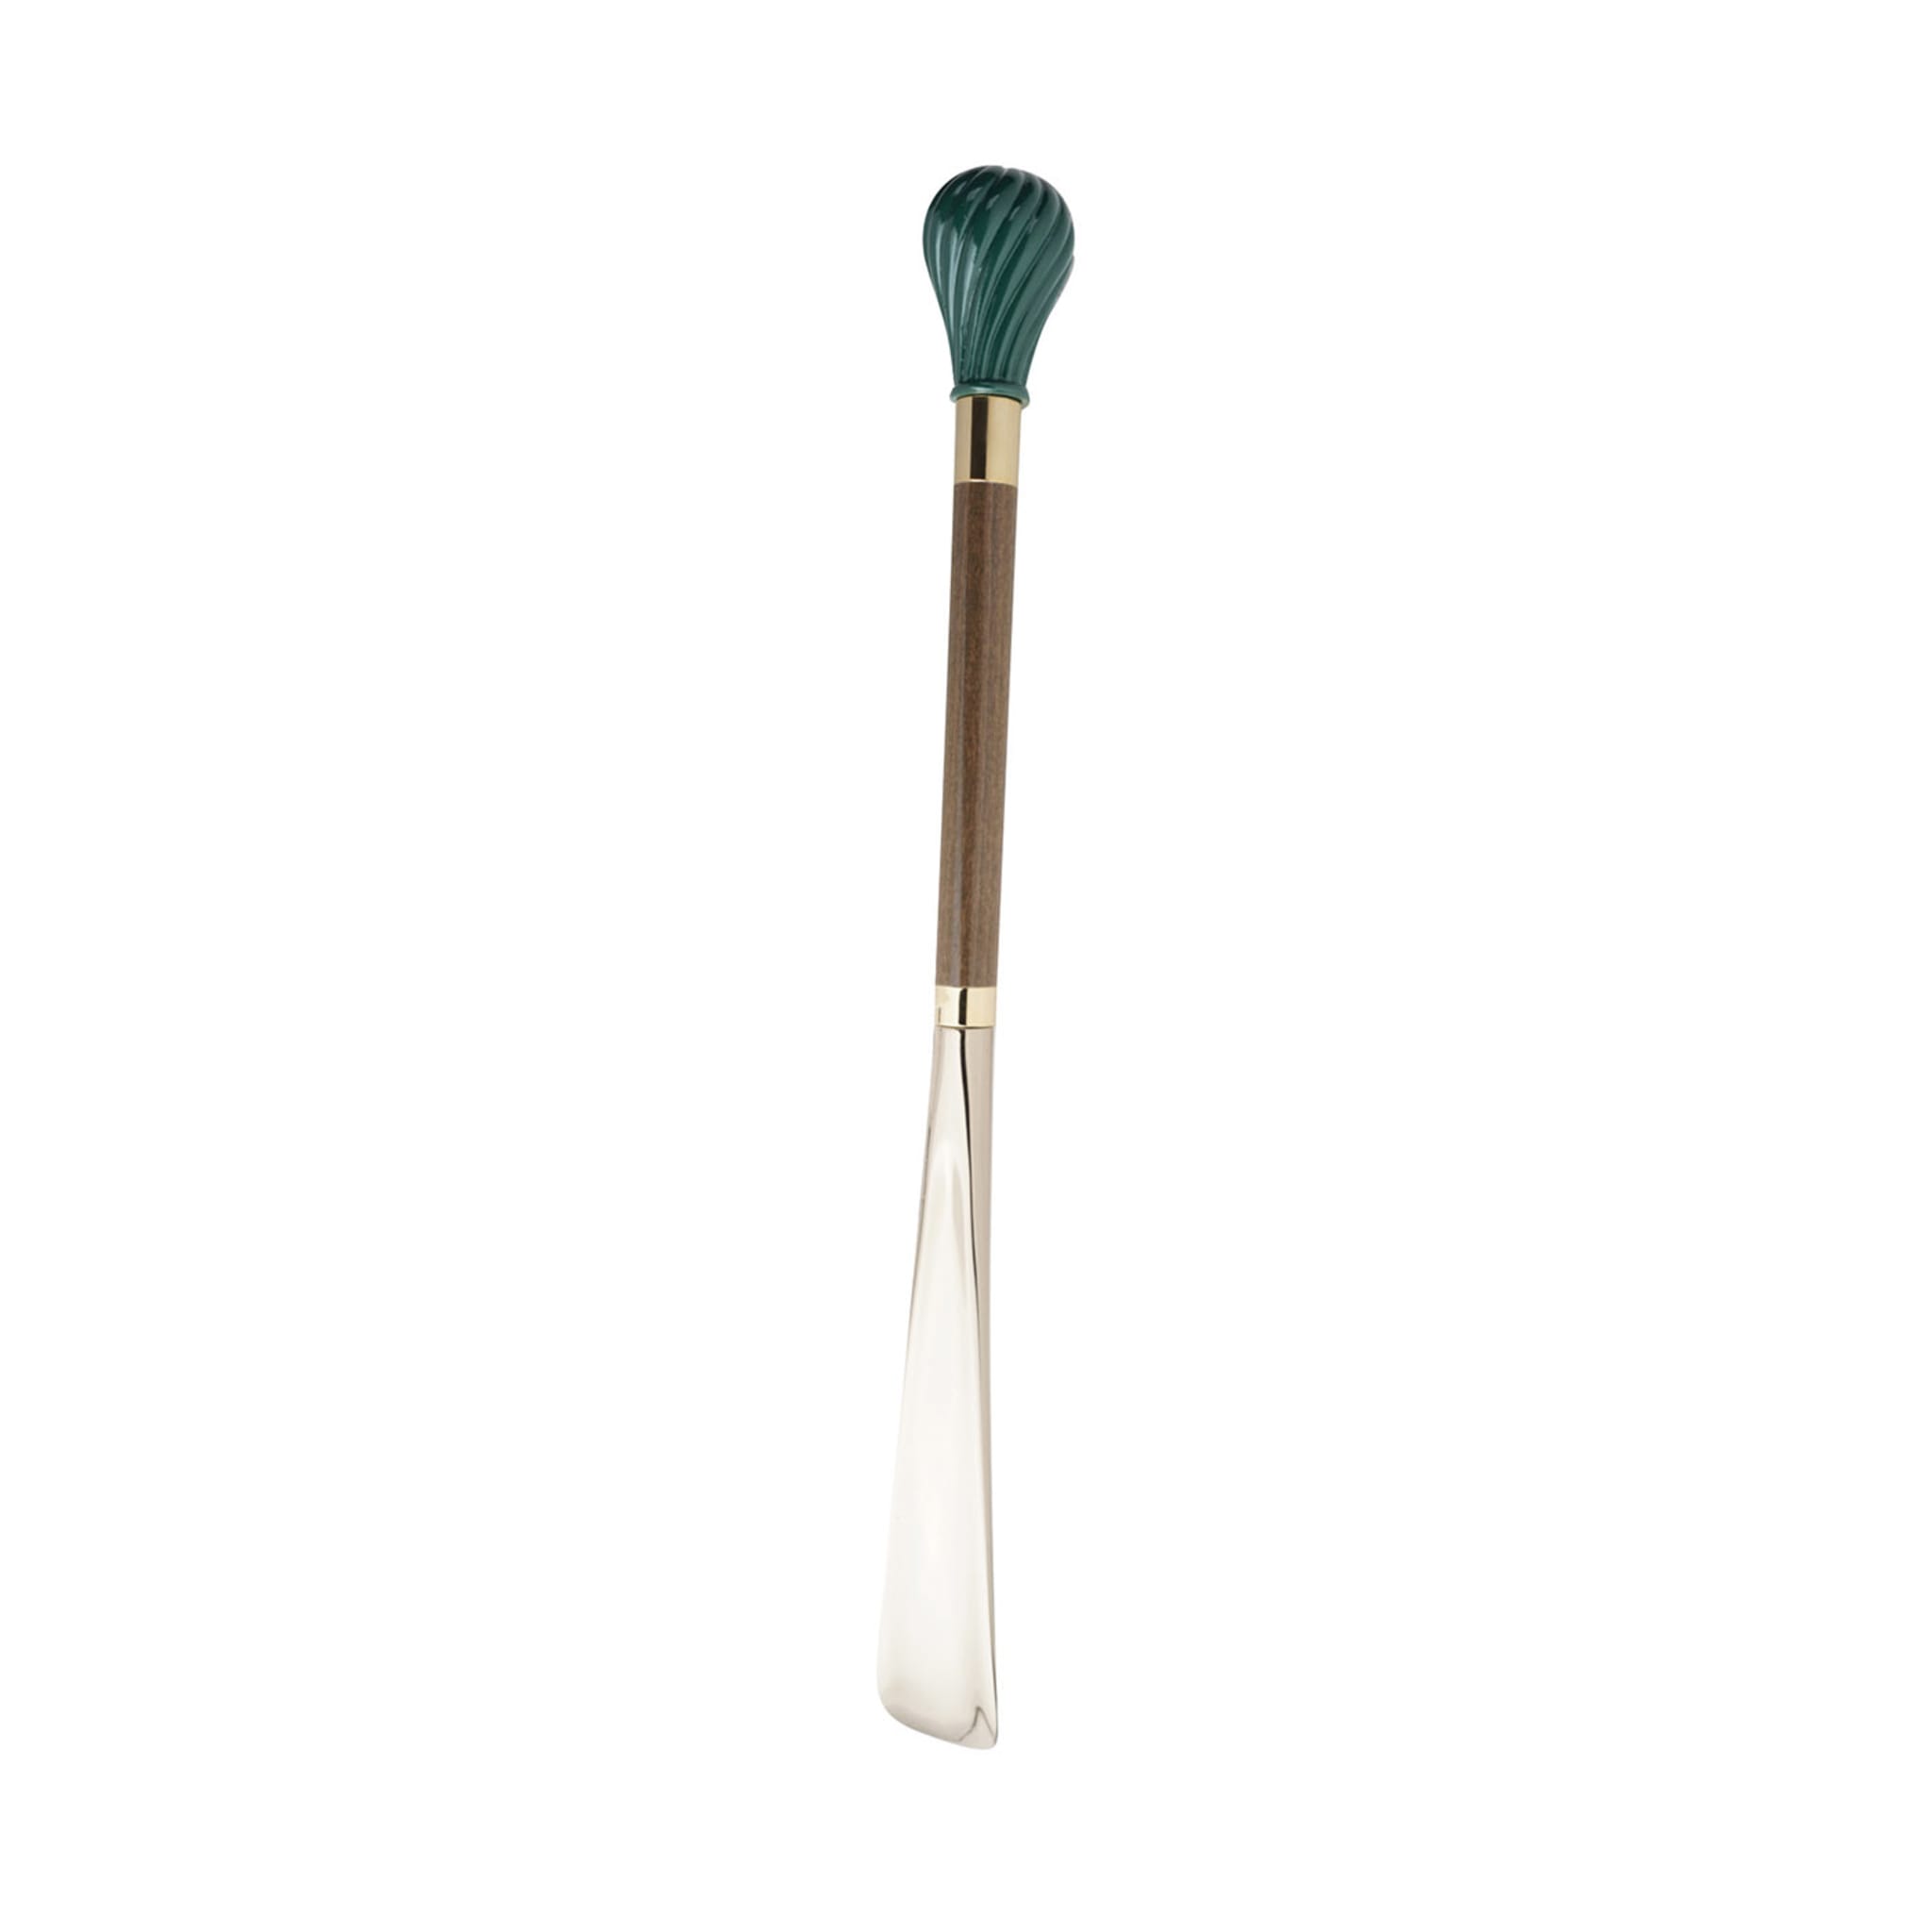 Taupe Ash Shoe Horn with Twisted Petrol-Blue Handle - Main view